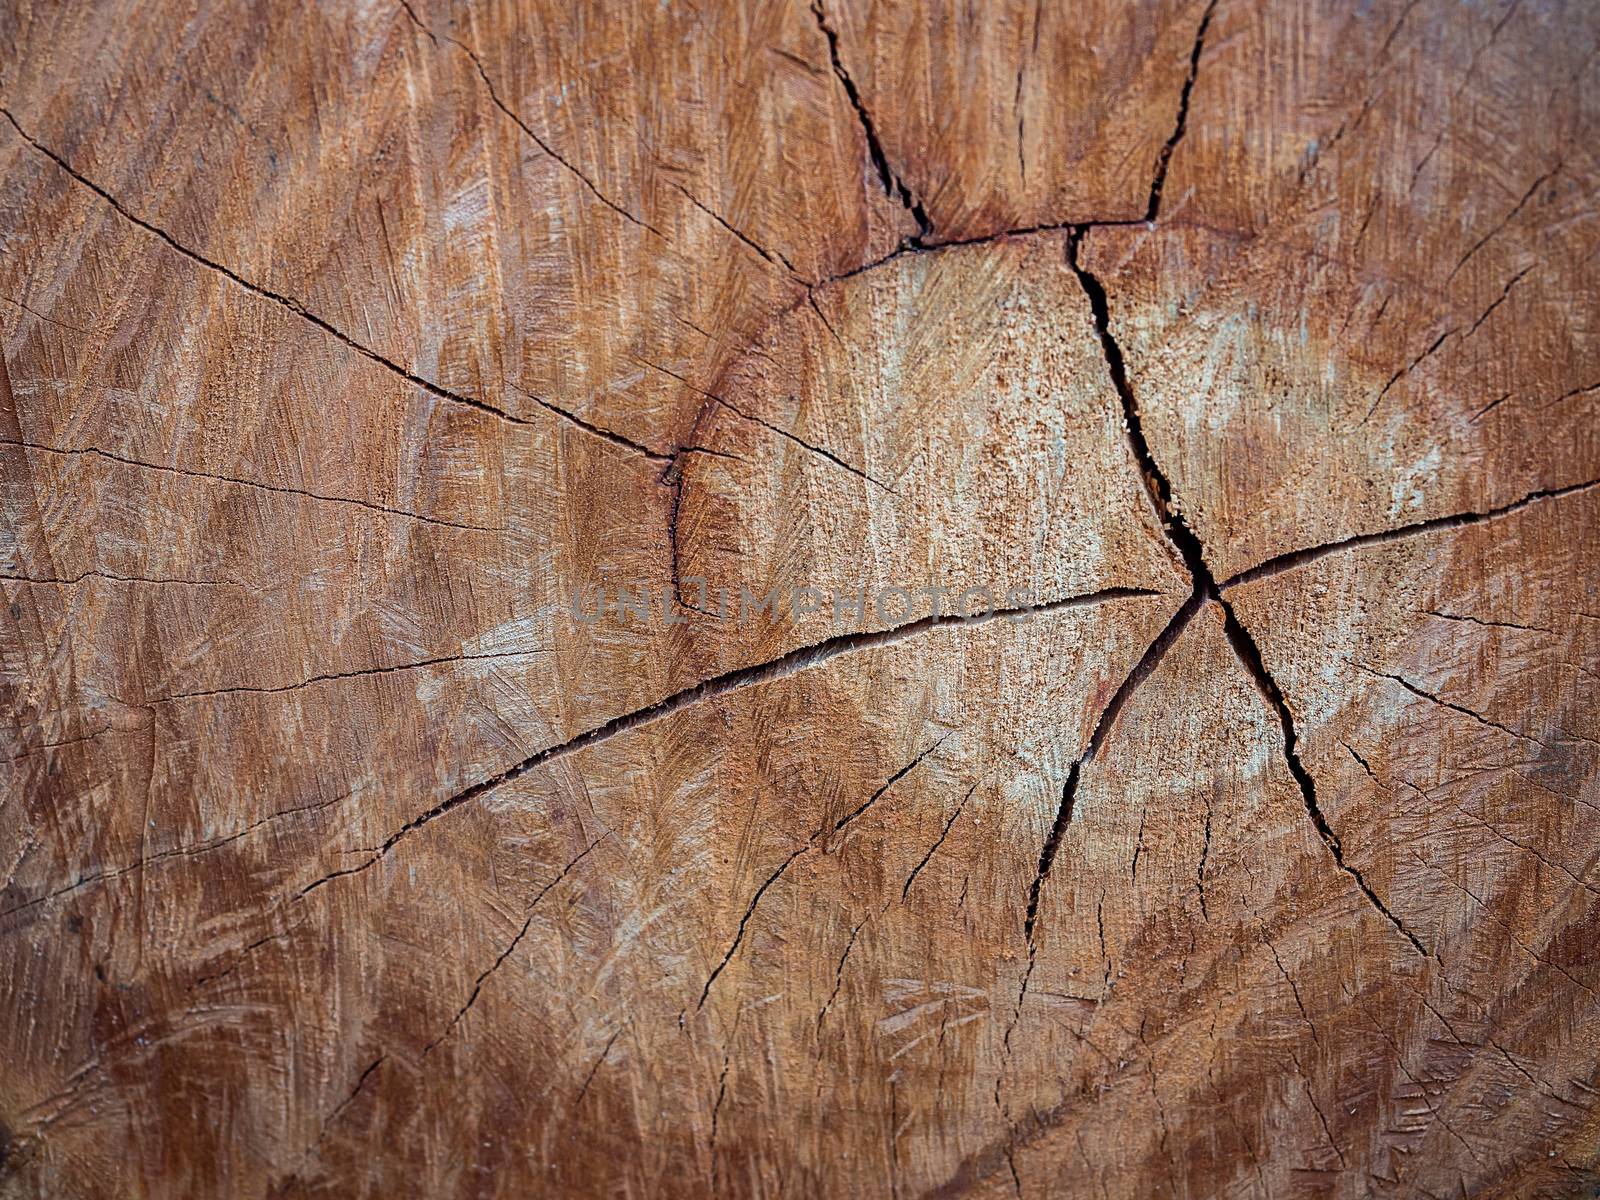 Tree stump texture background. Abstract brown cracked wood background.